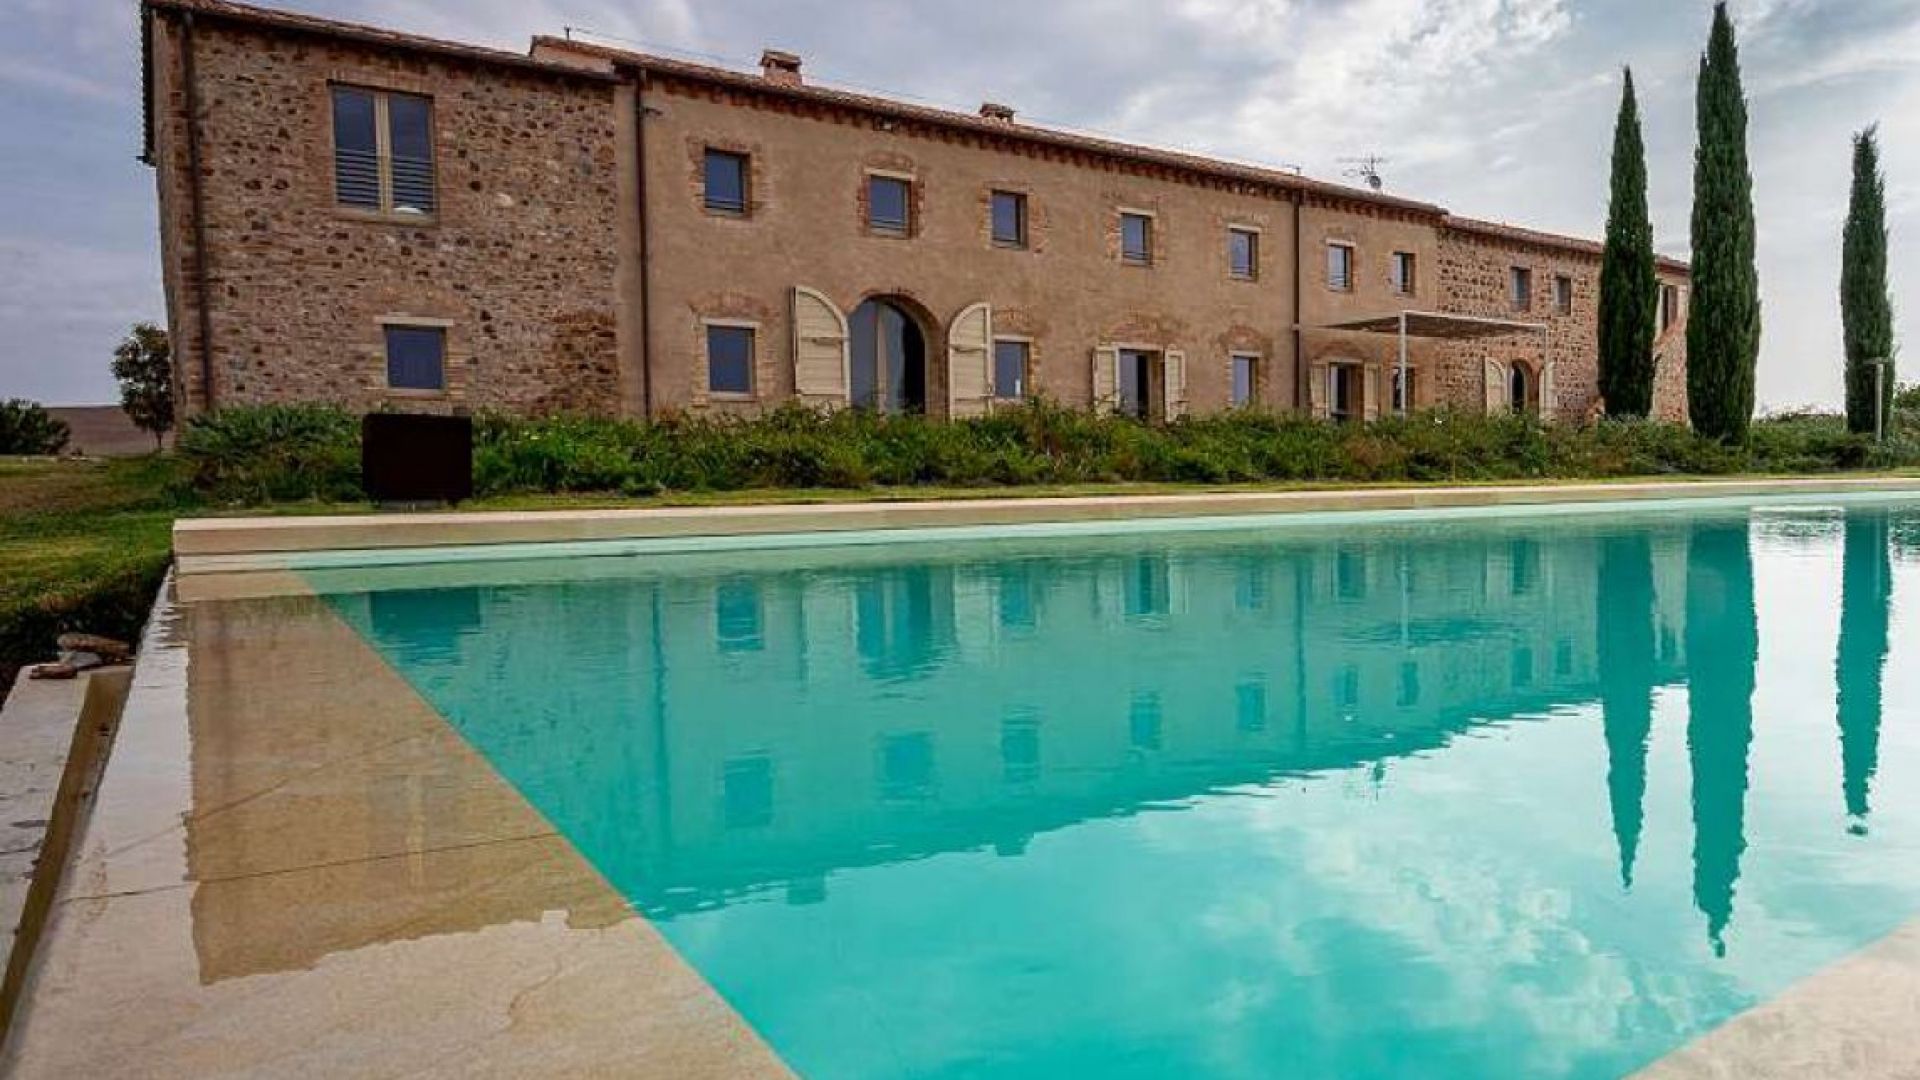 For sale cottage in  Volterra Toscana